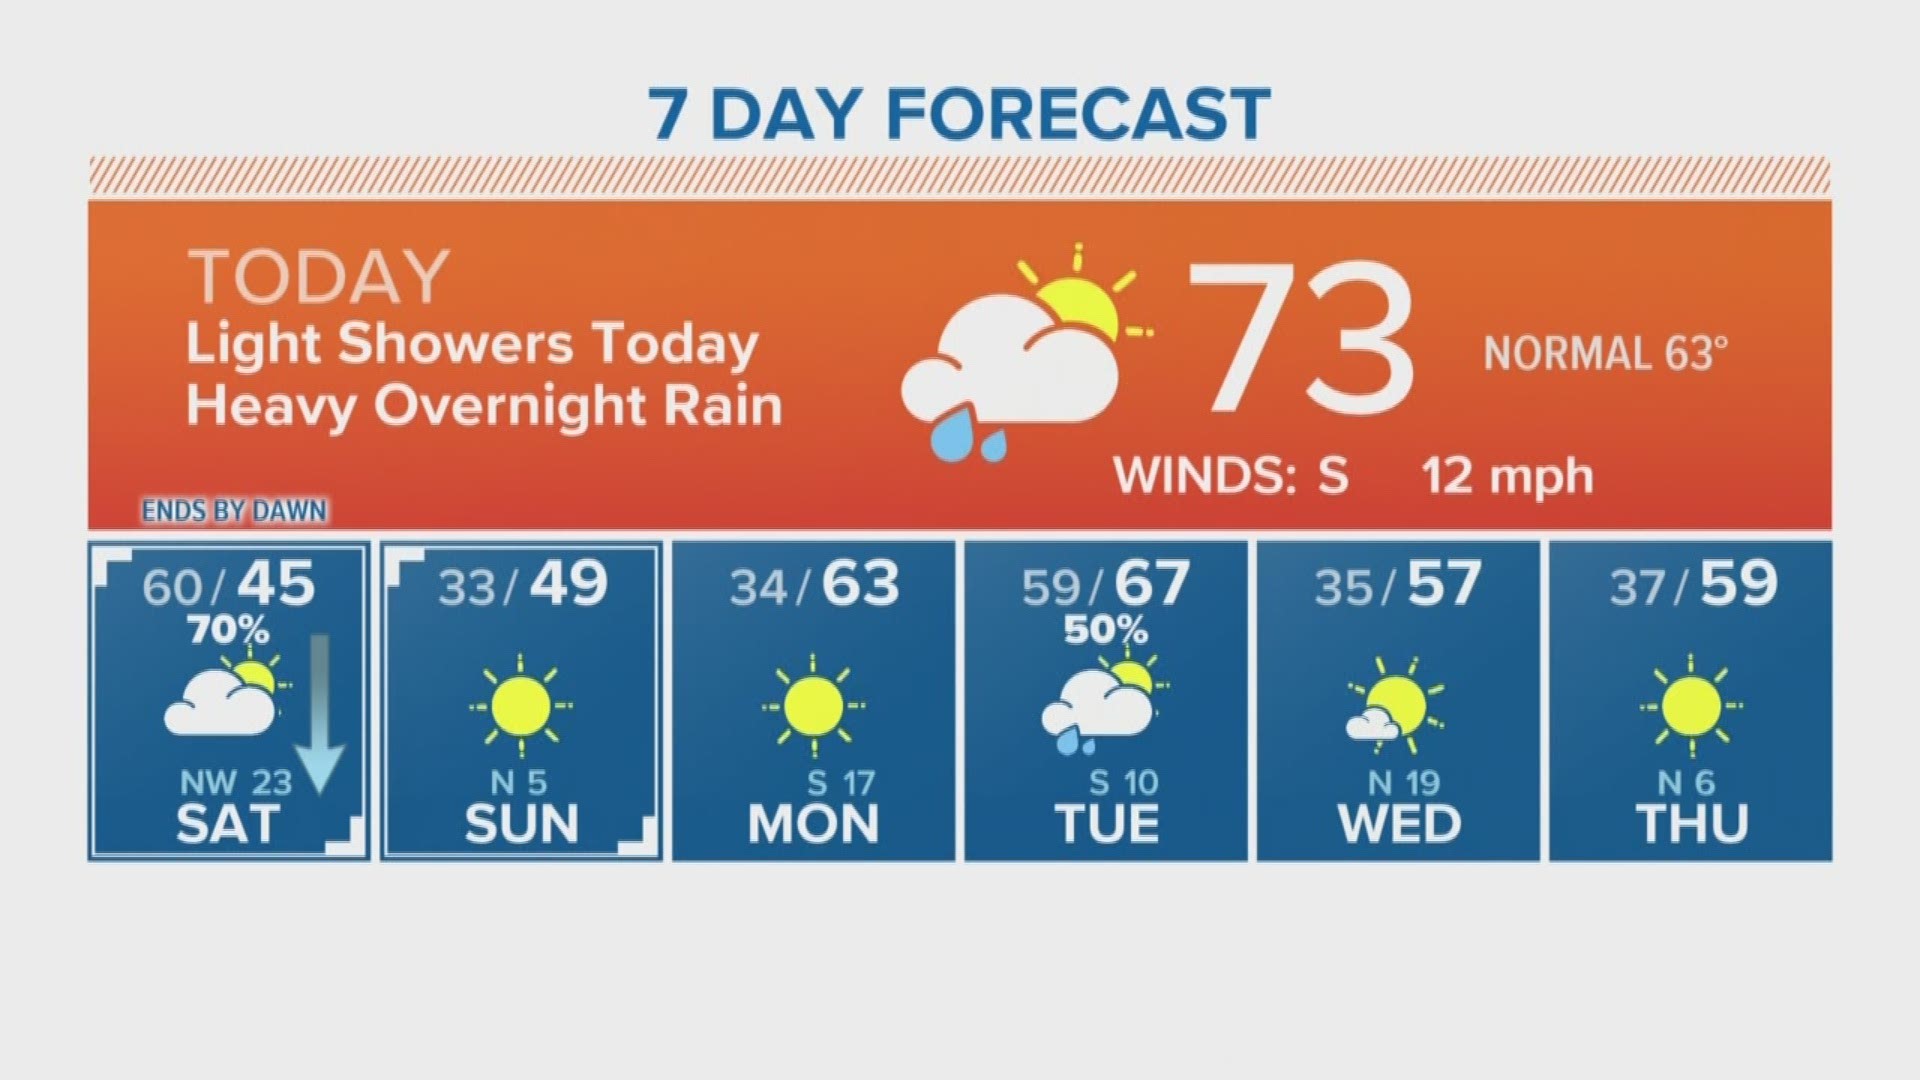 Friday will be warm in the 70s before frigid temperatures move into the Houston area this weekend.